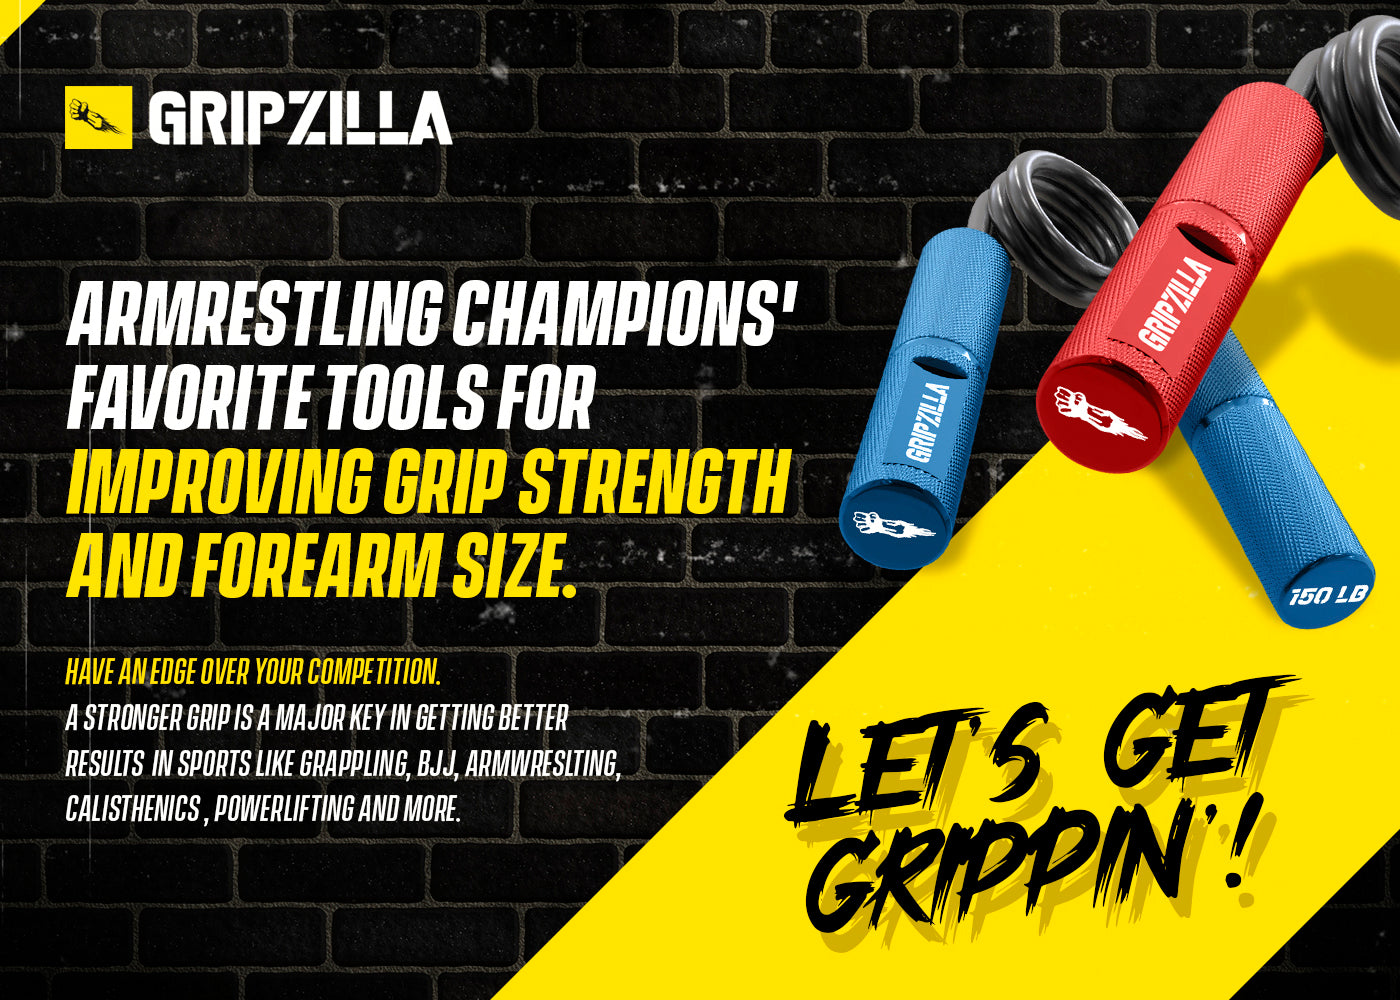 ARMRESTLING CHAMPIONS' FAVORITE TOOLS FOR IMPROVING GRIP STRENGTH AND FOREARM SIZE.  HAVE AN EDGE OVER YOUR COMPETITION.  A STRONGER GRIP IS A MAJOR KEY IN GETTING BETTER  RESULTS IN SPORTS LIKE GRAPPLING, BJJ, ARMWRESTING, CALISTHENICS, POWERLIFTING 